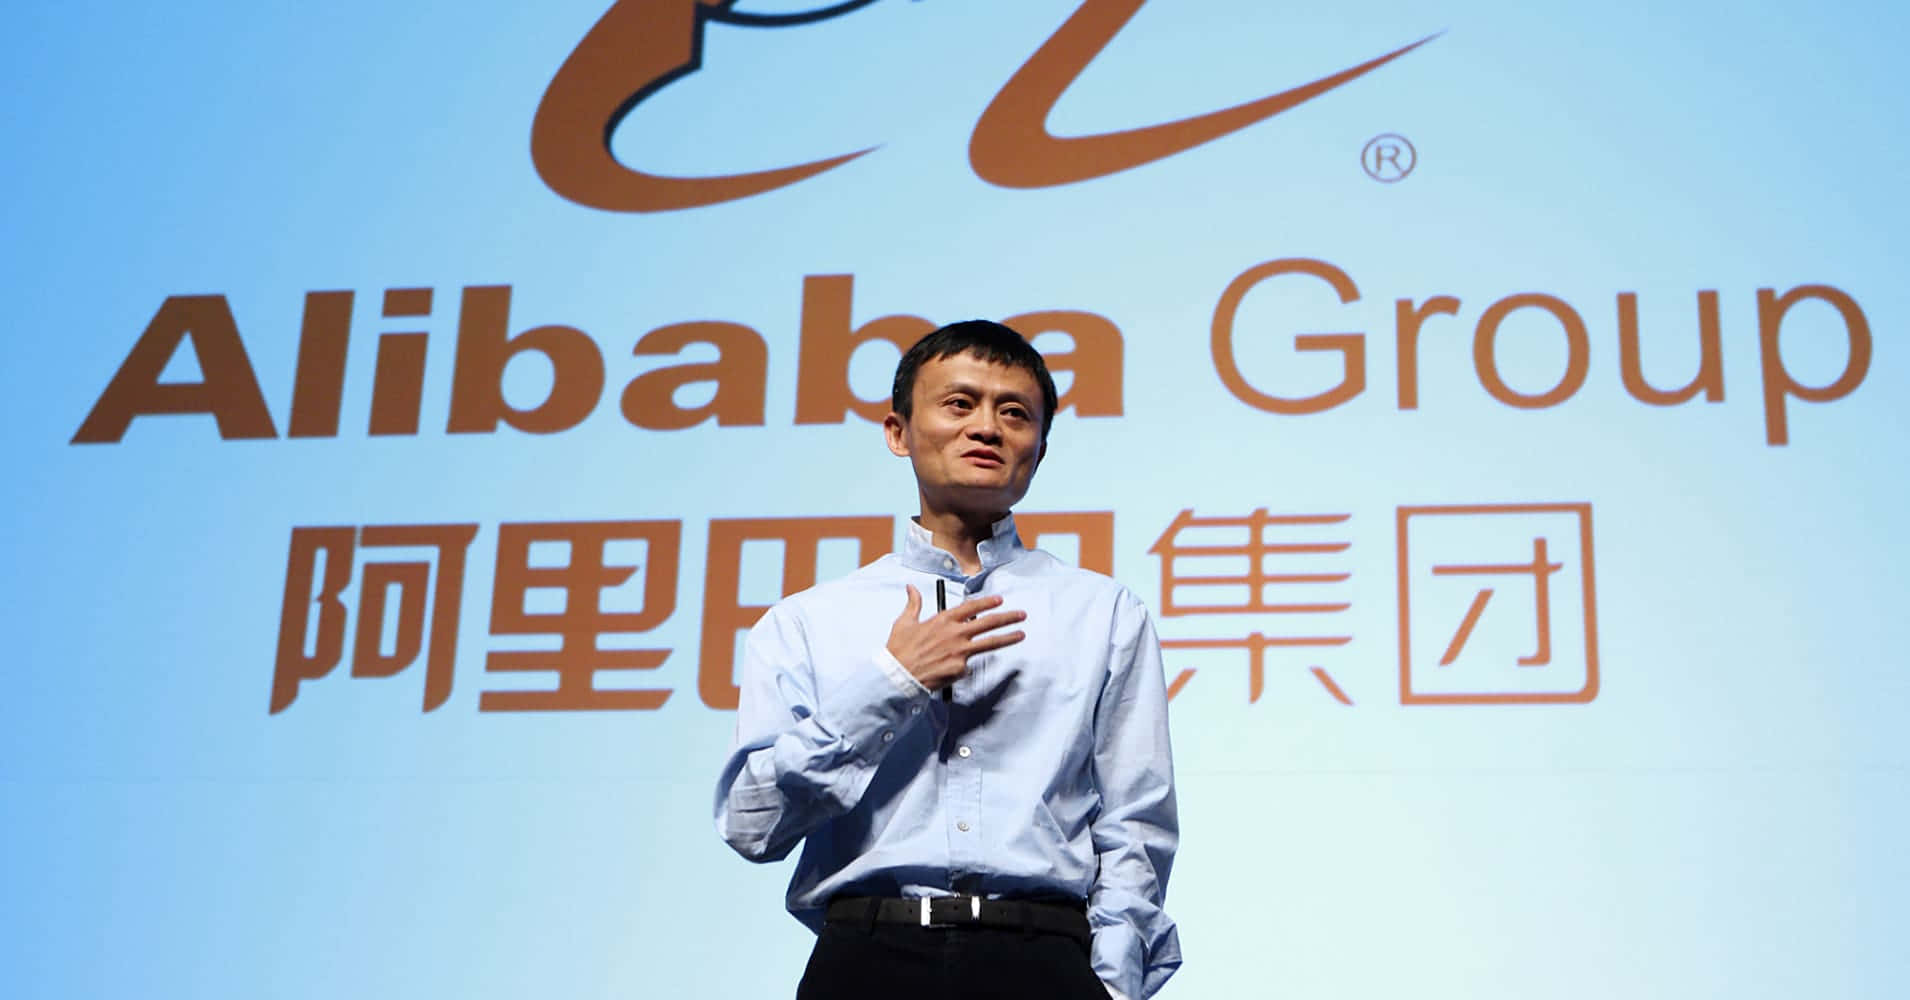 A Man Standing In Front Of A Logo For Alibaba Group